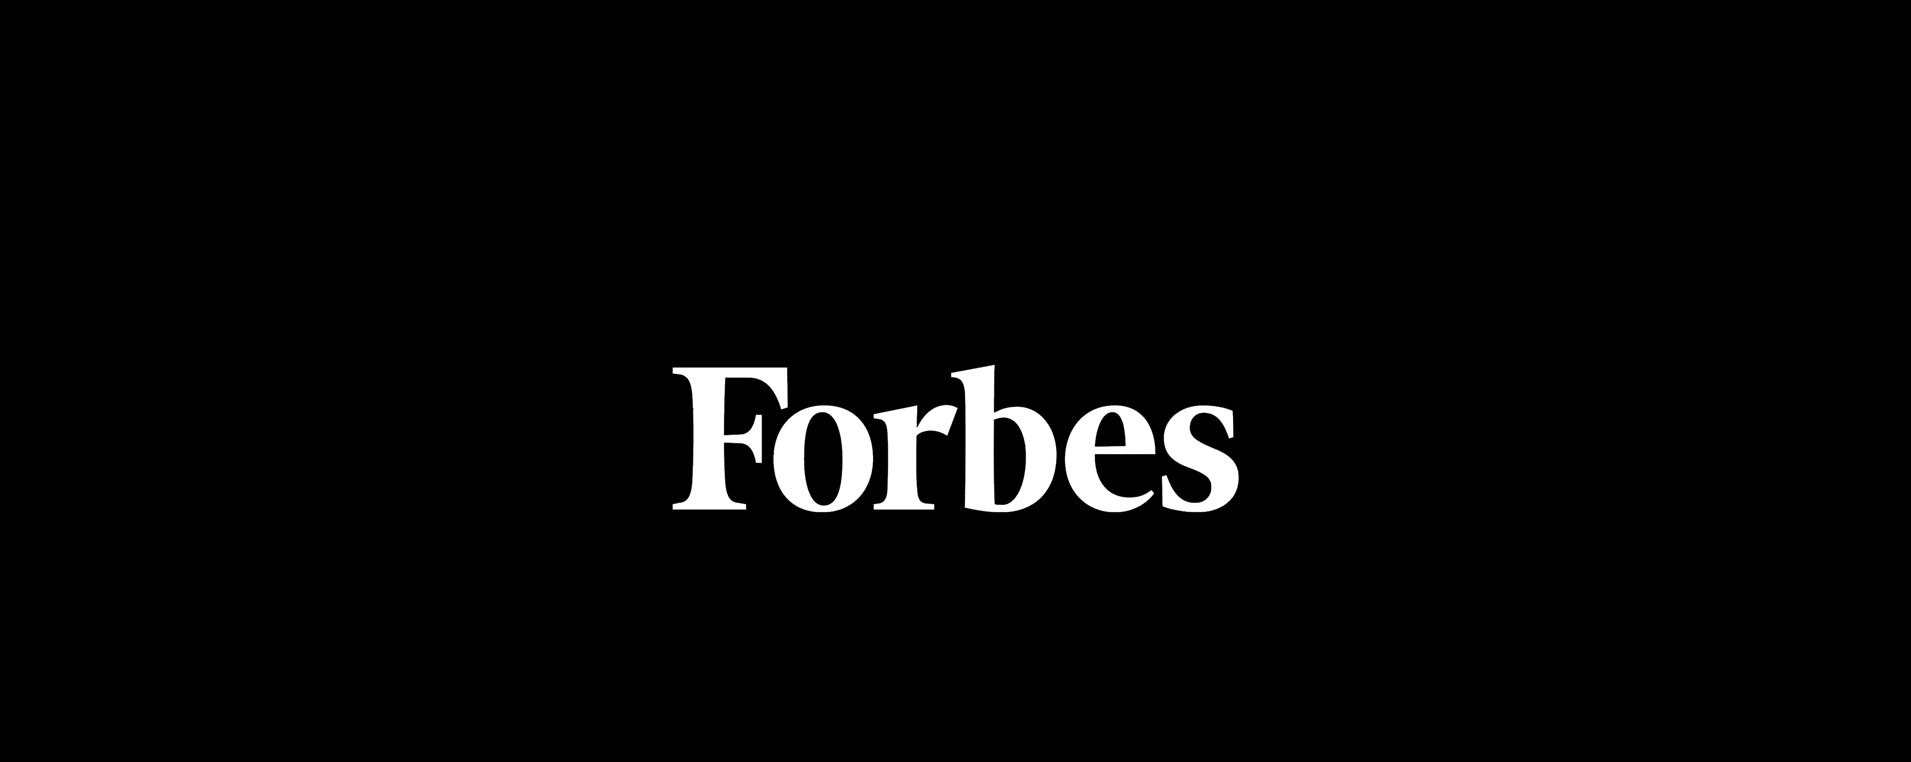 Tianqiao Chen and Chrissy Luo named in Forbes Asia’s 2017 Heroes of Philanthropy List